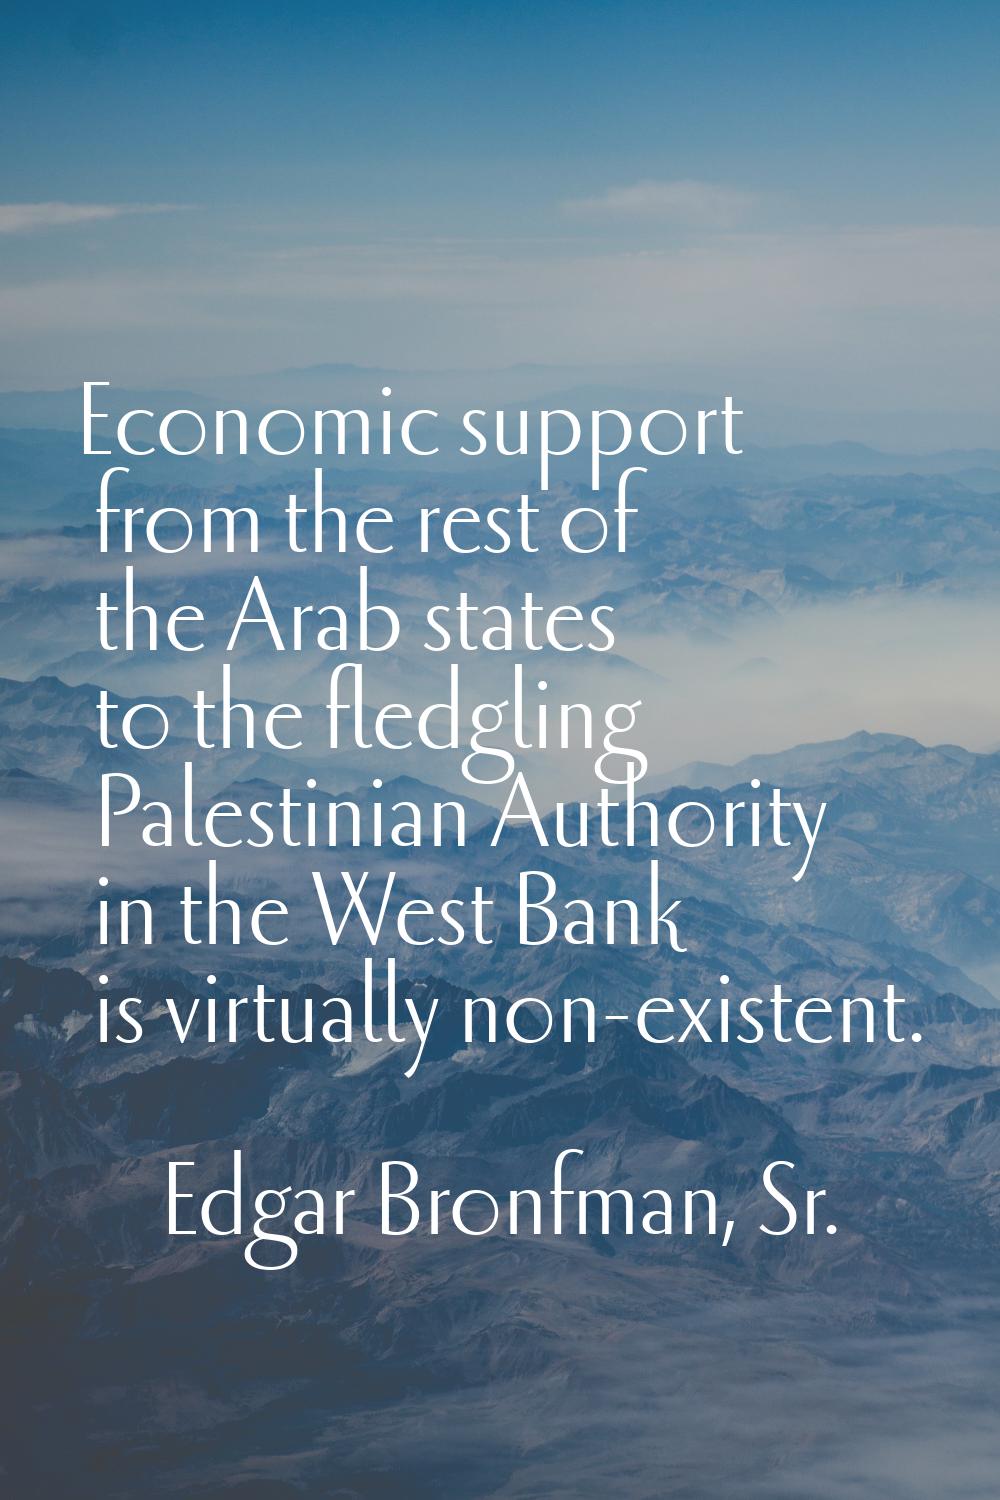 Economic support from the rest of the Arab states to the fledgling Palestinian Authority in the Wes